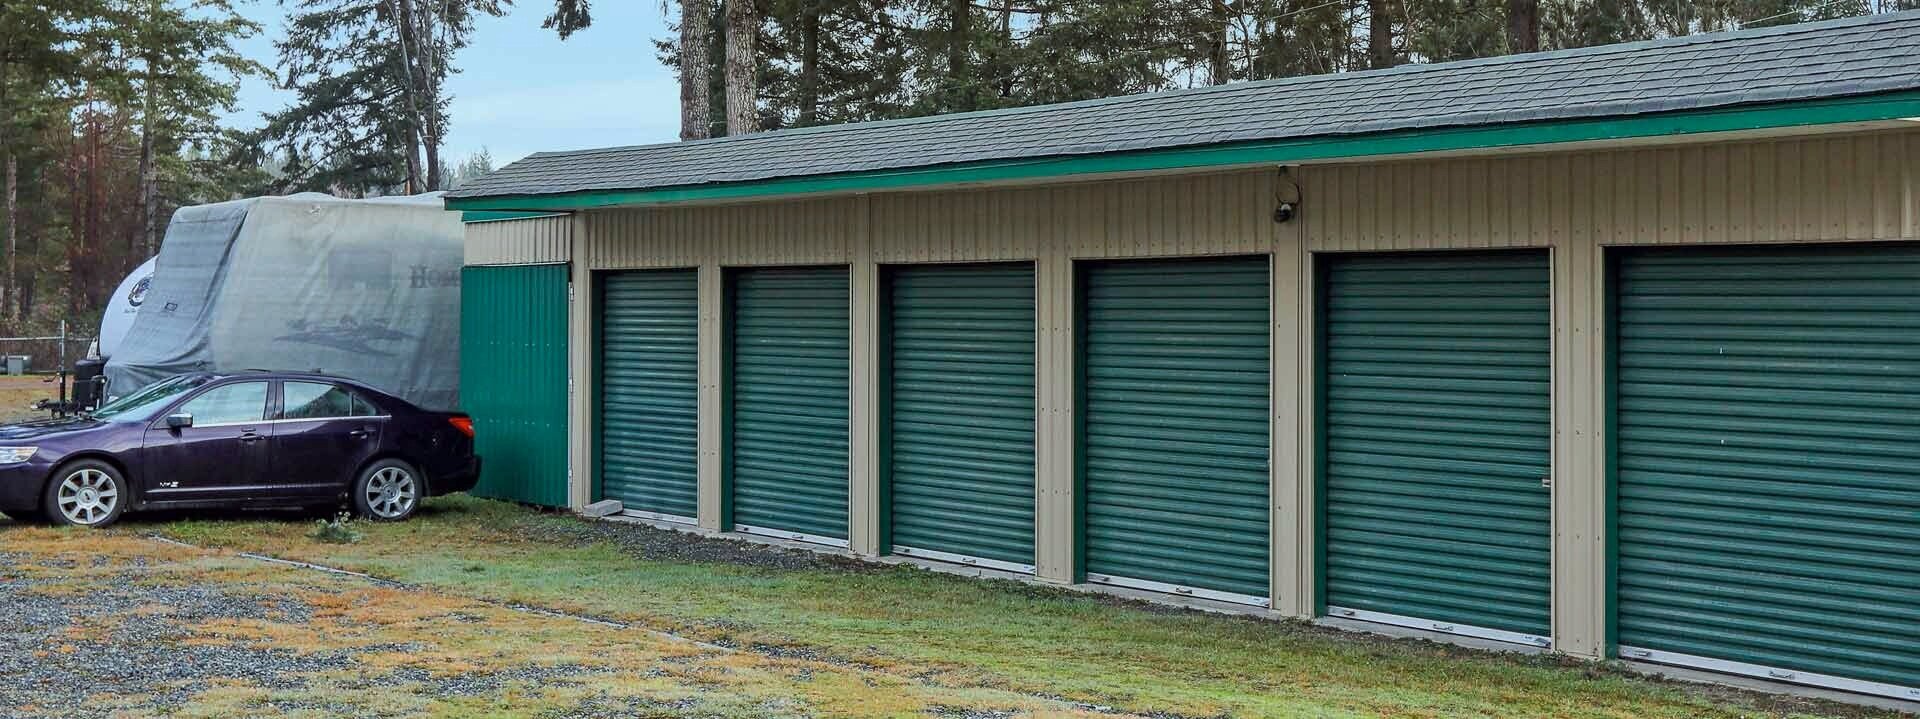 View of medium sized units with garage doors.